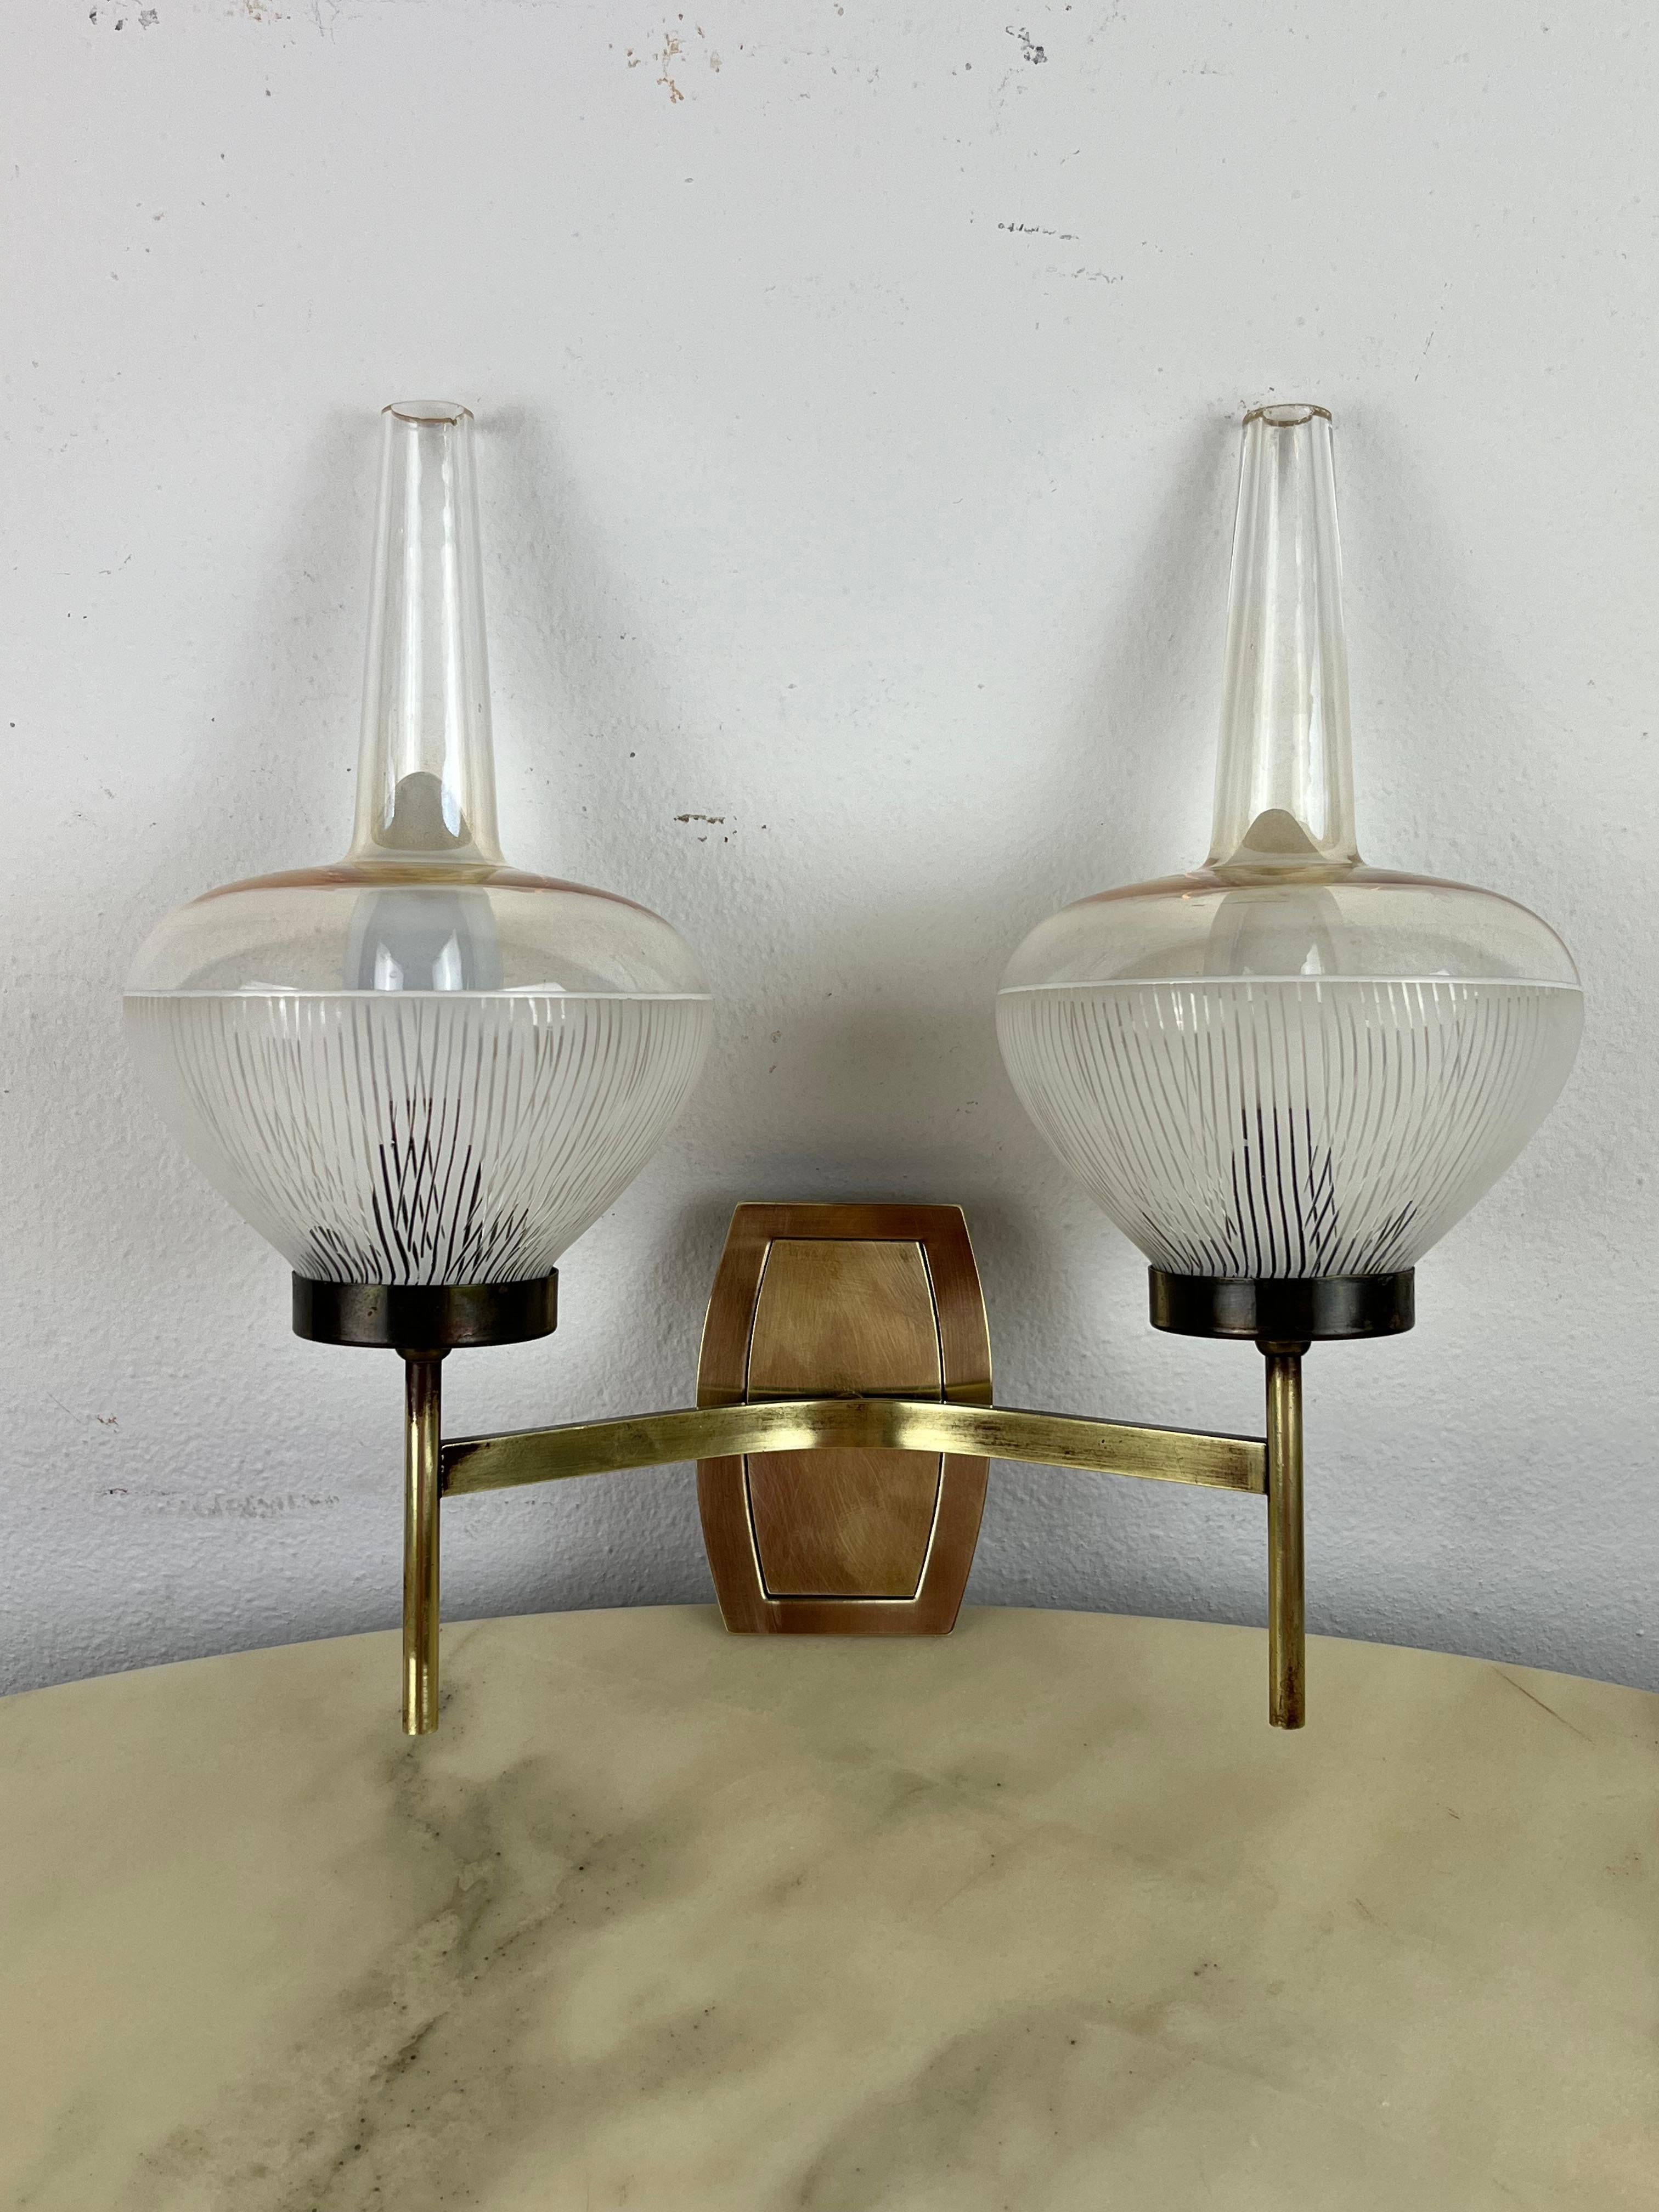 Mid-Century brass and ribbed glass wall light, Italian design from the 1960s.
Two E14 lamps, intact and working, brass and aluminum structure, ribbed glass bowls. Good condition, small signs of aging.